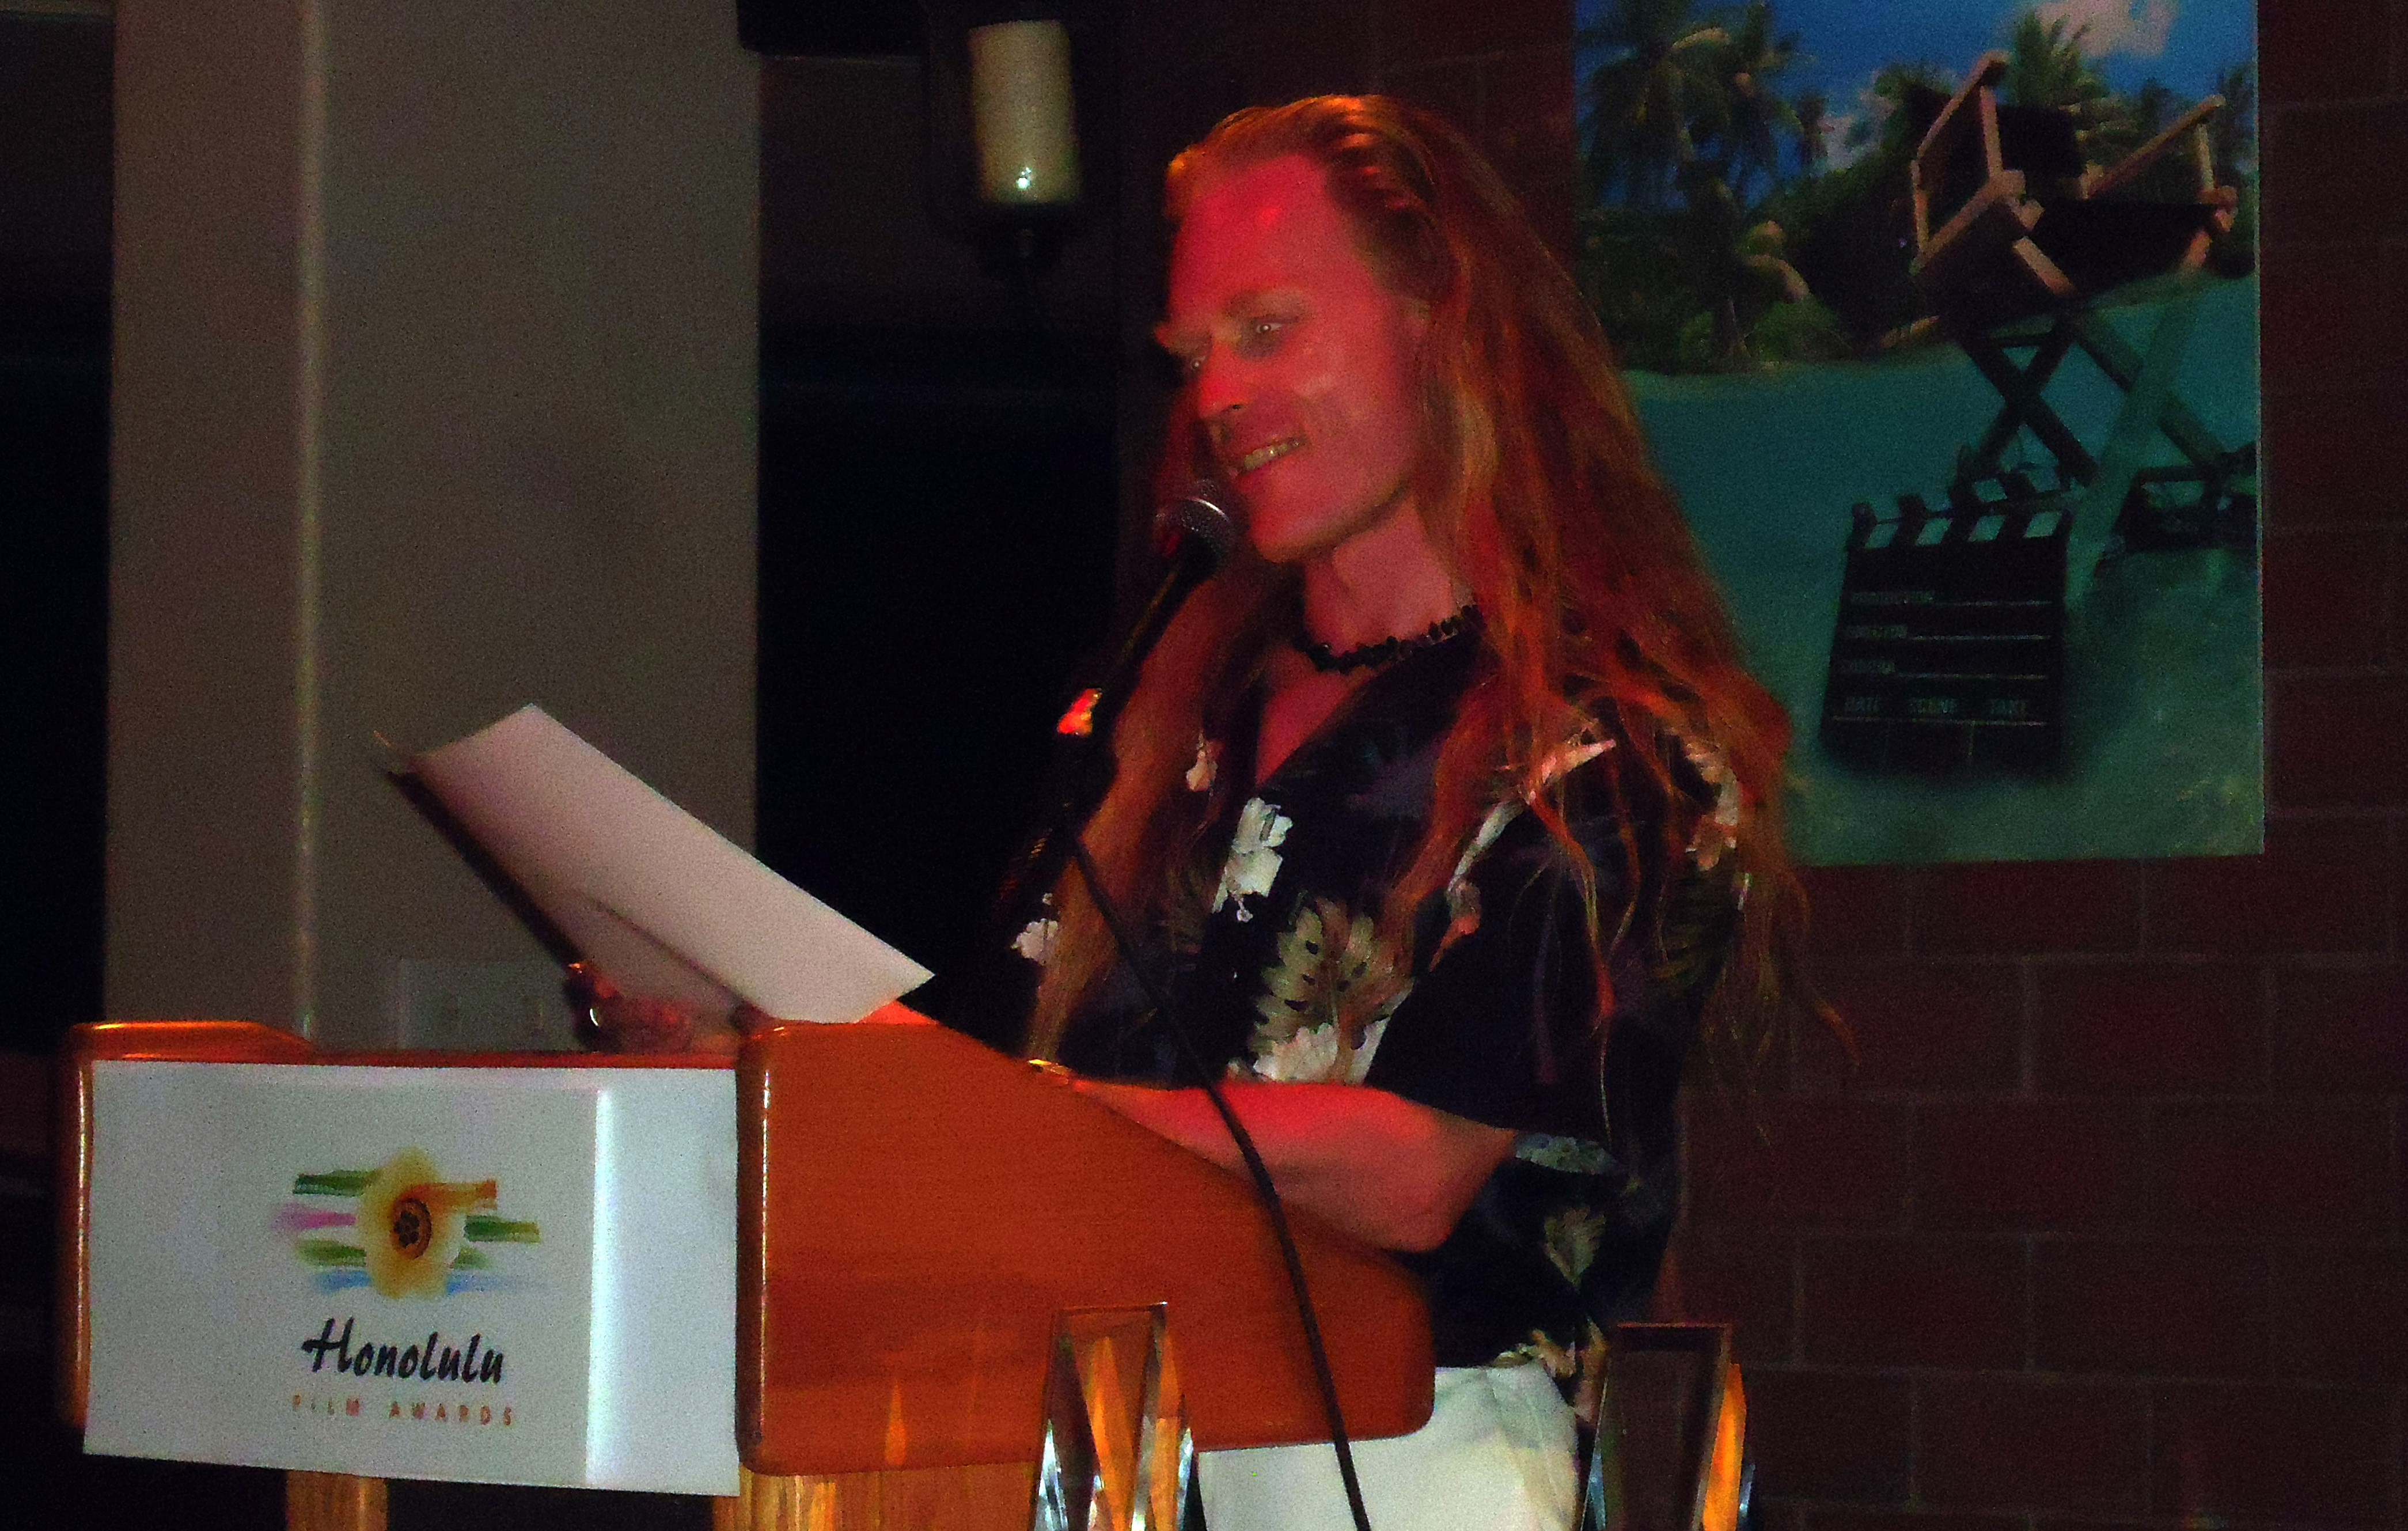 Vancouver Vagabond II wins the Silver Lei, Honolulu Film Awards, May 2012... 